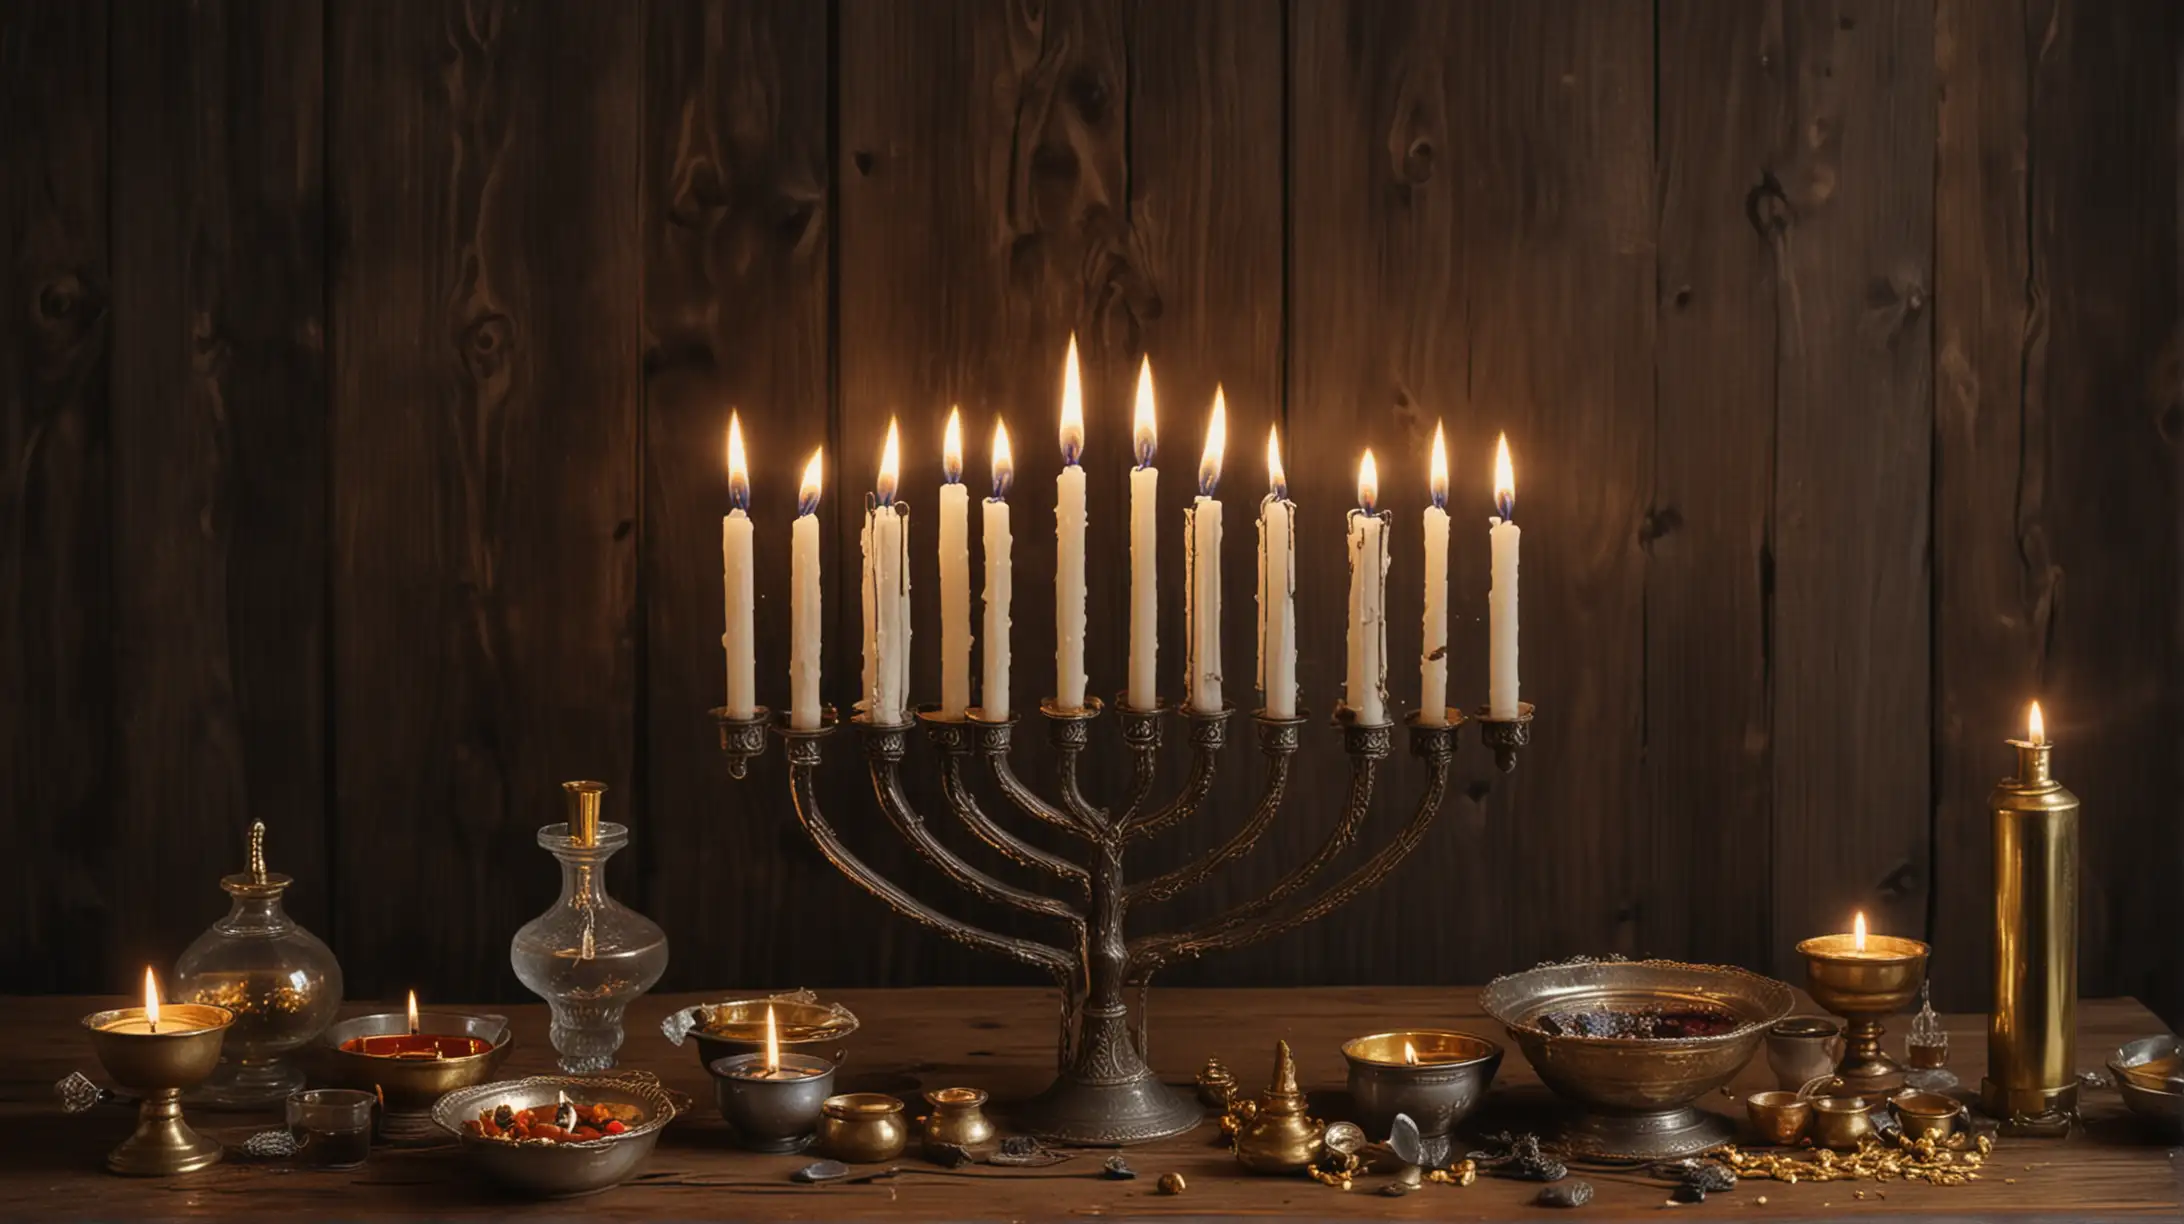 Candles in a menorah, lit, on a wooden table, with some bottles of incense oil, and some gold and silver bowls